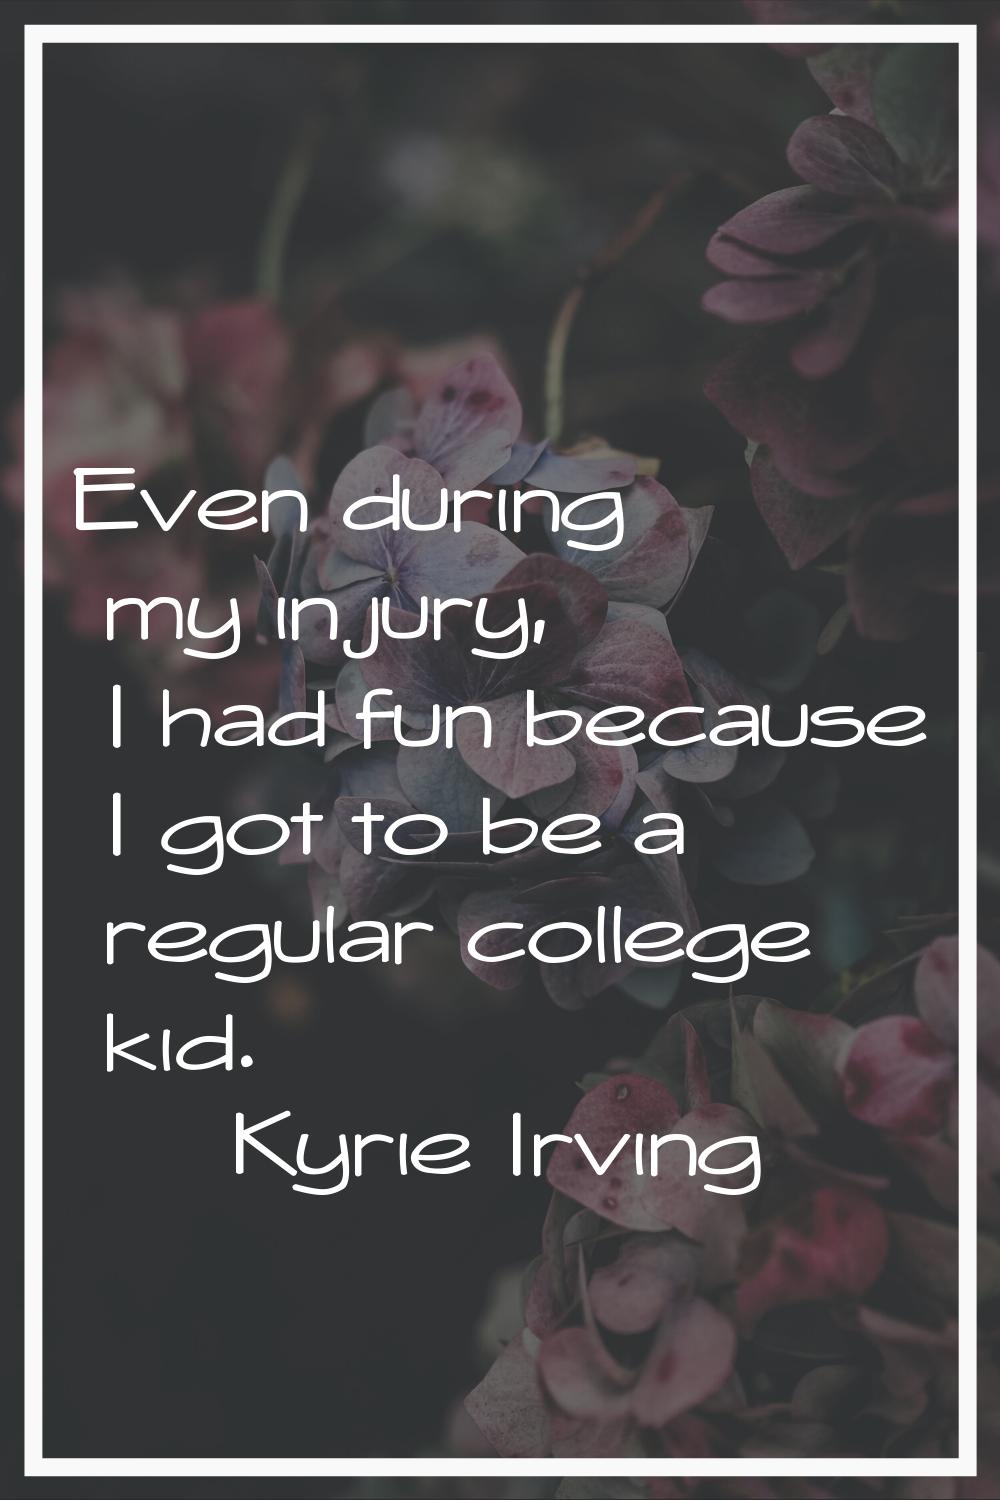 Even during my injury, I had fun because I got to be a regular college kid.